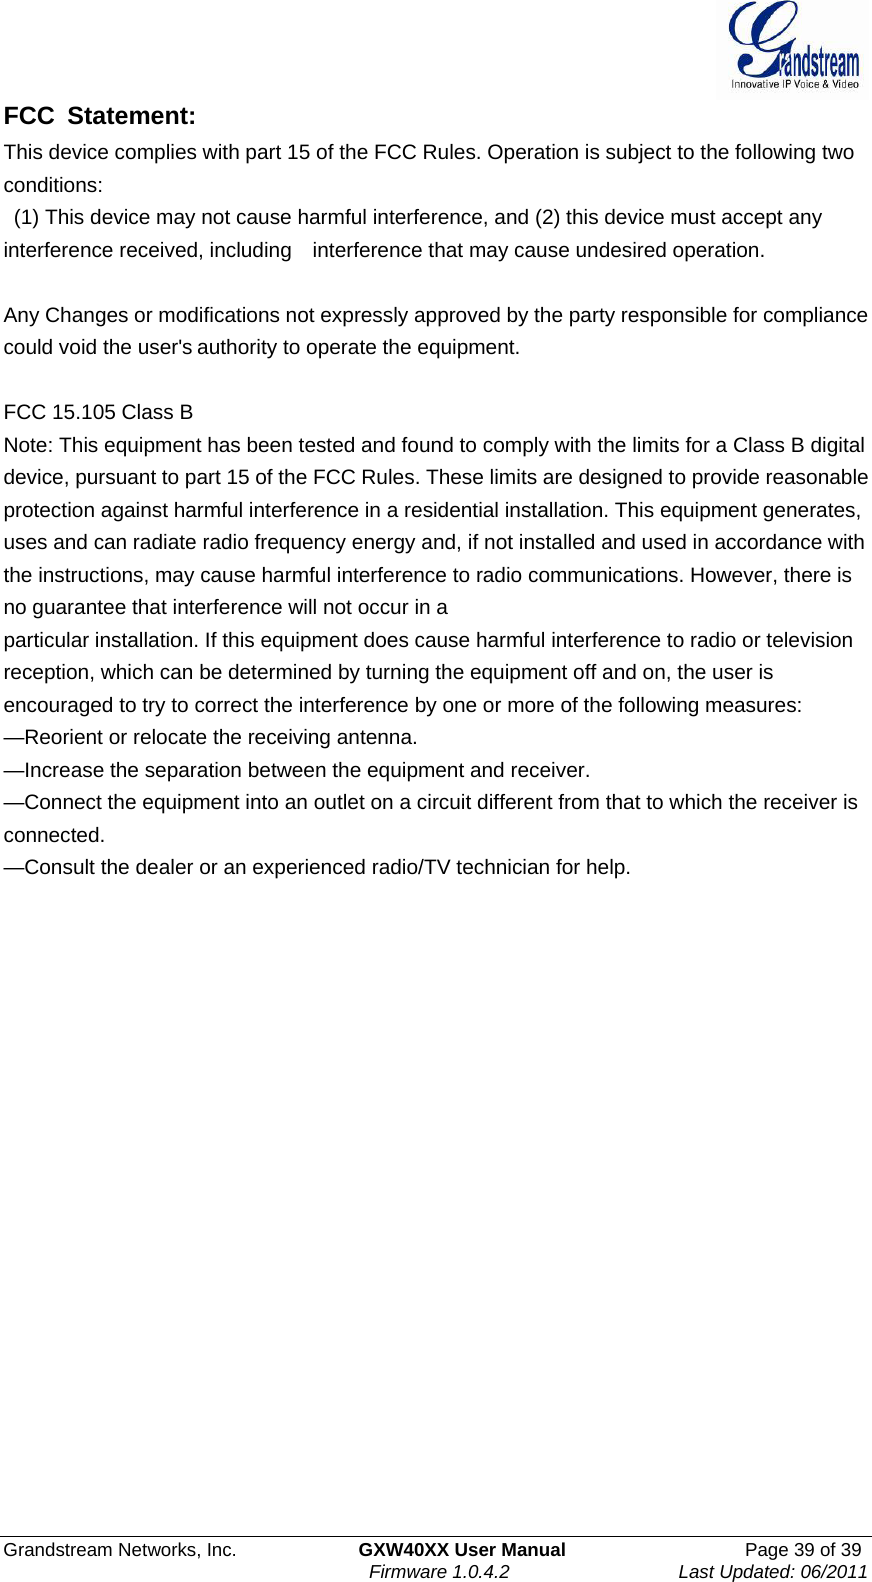                Grandstream Networks, Inc.             GXW40XX User Manual                   Page 39 of 39Firmware 1.0.4.2                  Last Updated: 06/2011  FCC Statement: This device complies with part 15 of the FCC Rules. Operation is subject to the following two conditions:   (1) This device may not cause harmful interference, and (2) this device must accept any interference received, including    interference that may cause undesired operation.        Any Changes or modifications not expressly approved by the party responsible for compliance could void the user&apos;s authority to operate the equipment.      FCC 15.105 Class B Note: This equipment has been tested and found to comply with the limits for a Class B digital device, pursuant to part 15 of the FCC Rules. These limits are designed to provide reasonable protection against harmful interference in a residential installation. This equipment generates, uses and can radiate radio frequency energy and, if not installed and used in accordance with the instructions, may cause harmful interference to radio communications. However, there is no guarantee that interference will not occur in a particular installation. If this equipment does cause harmful interference to radio or television reception, which can be determined by turning the equipment off and on, the user is encouraged to try to correct the interference by one or more of the following measures: —Reorient or relocate the receiving antenna. —Increase the separation between the equipment and receiver. —Connect the equipment into an outlet on a circuit different from that to which the receiver is connected. —Consult the dealer or an experienced radio/TV technician for help.   